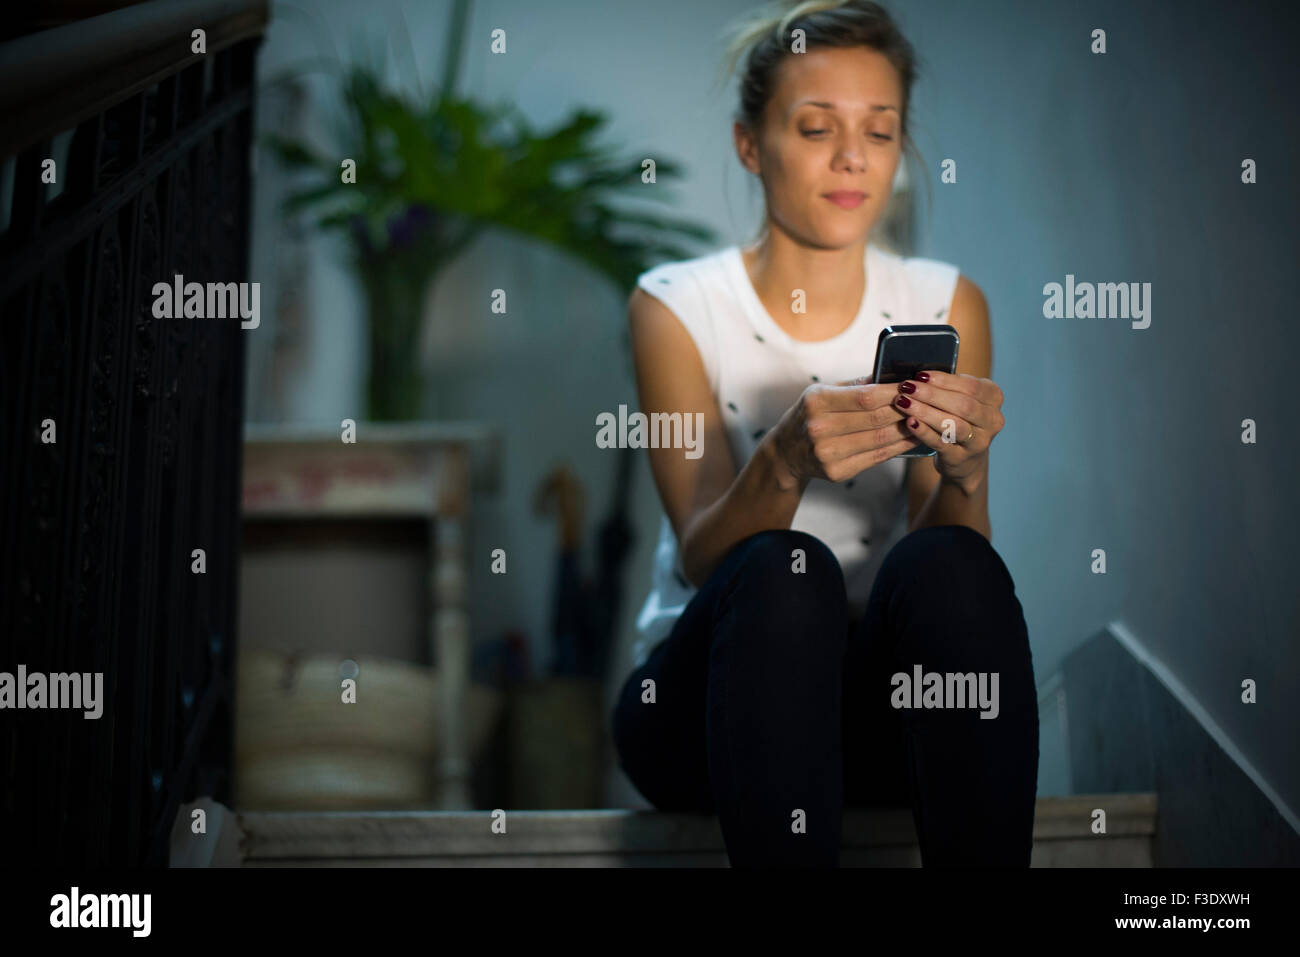 Woman text messaging with smartphone Stock Photo